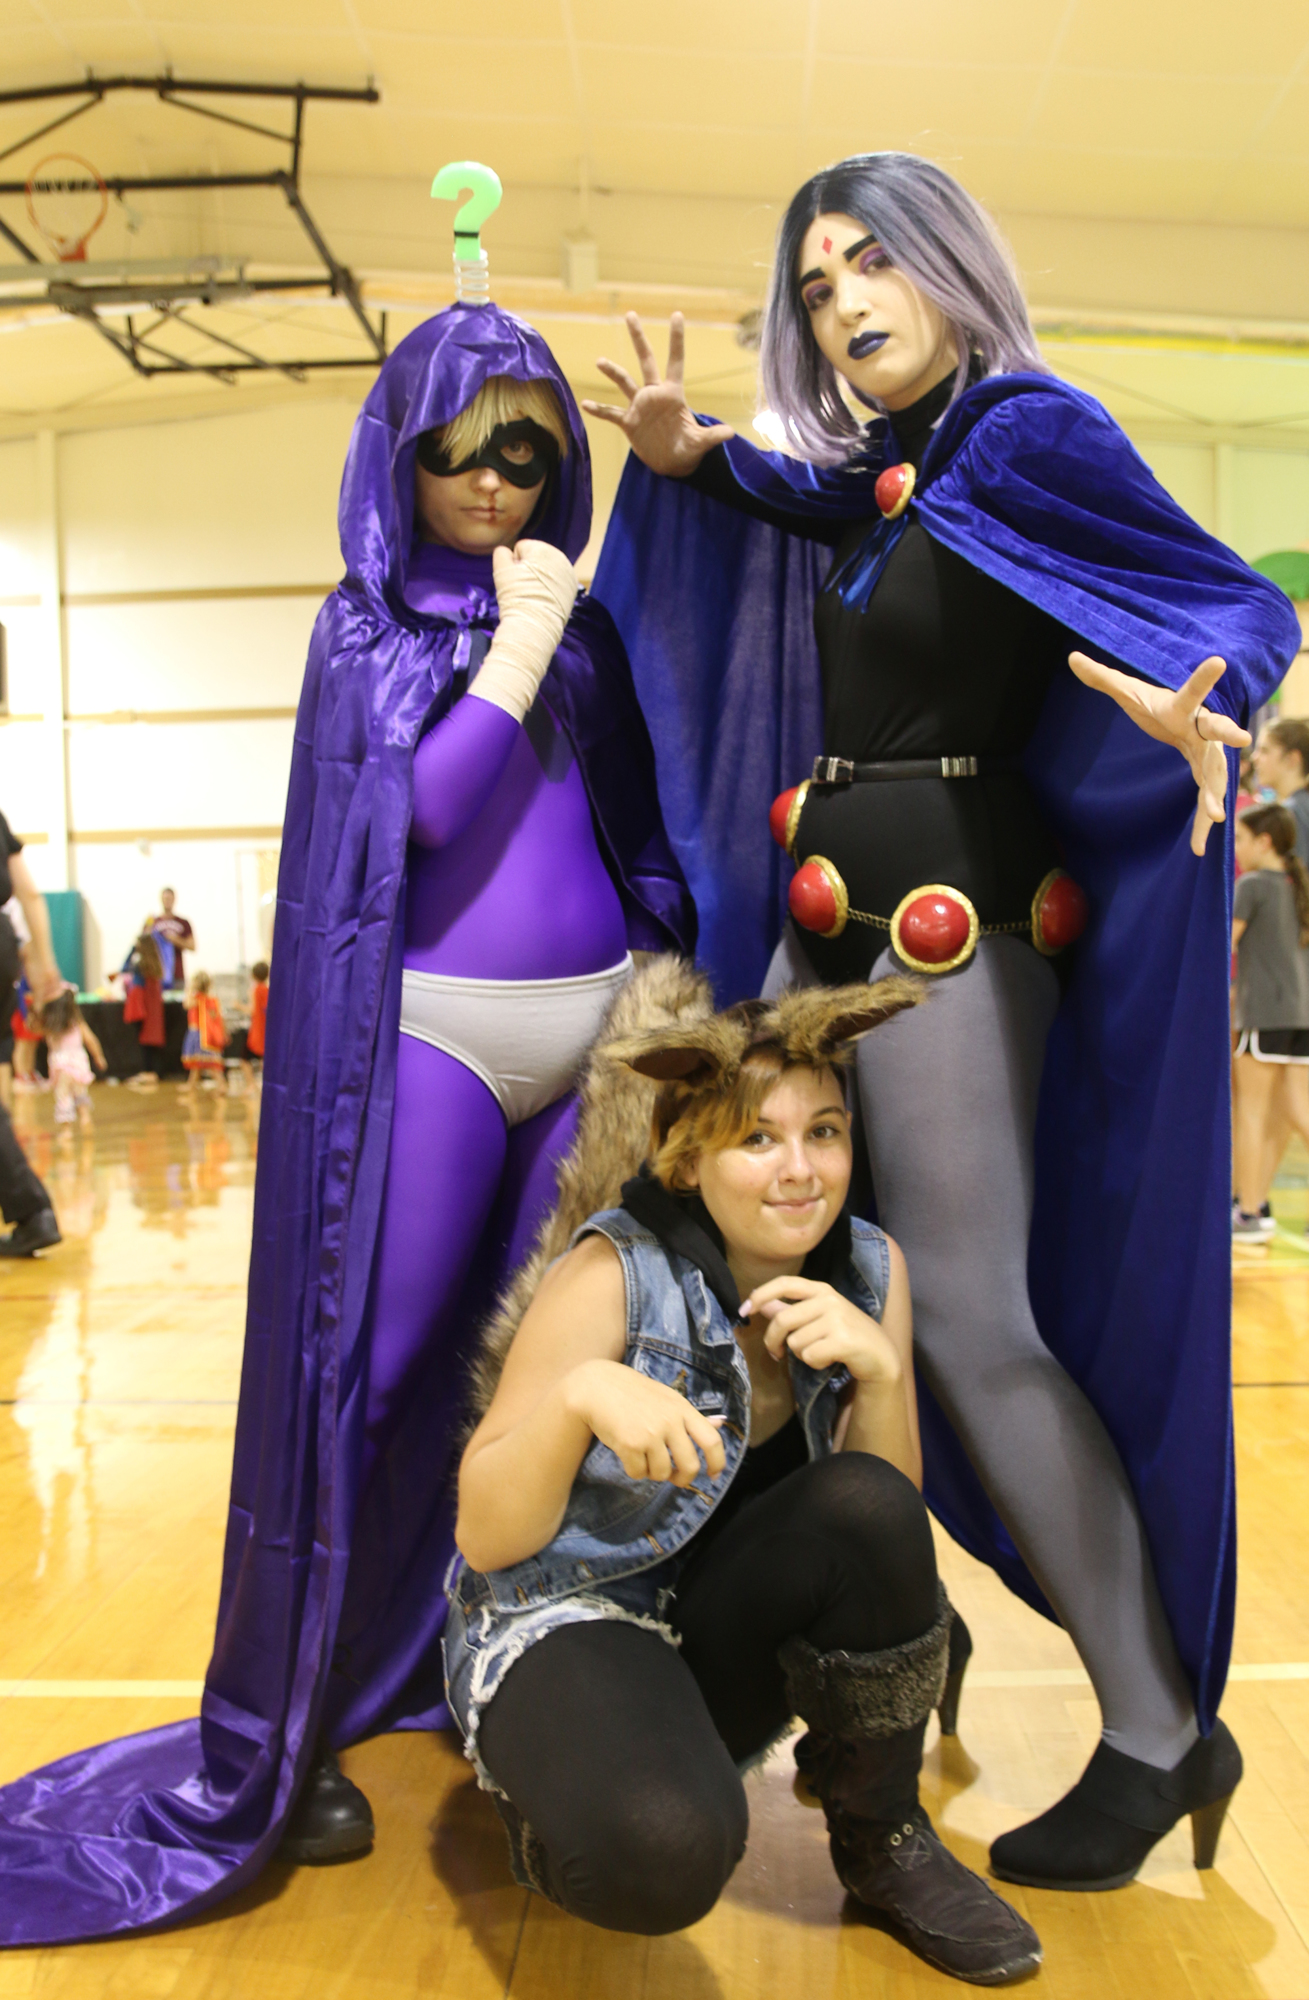 Diane Lancaster, as Mysterion, May Tator as Teen Titan's Raven, and Lakota Gibbs as Squirrel Girl, during the annual National Night Out event on Tuesday, Aug. 6. Photo by Jarleene Almenas